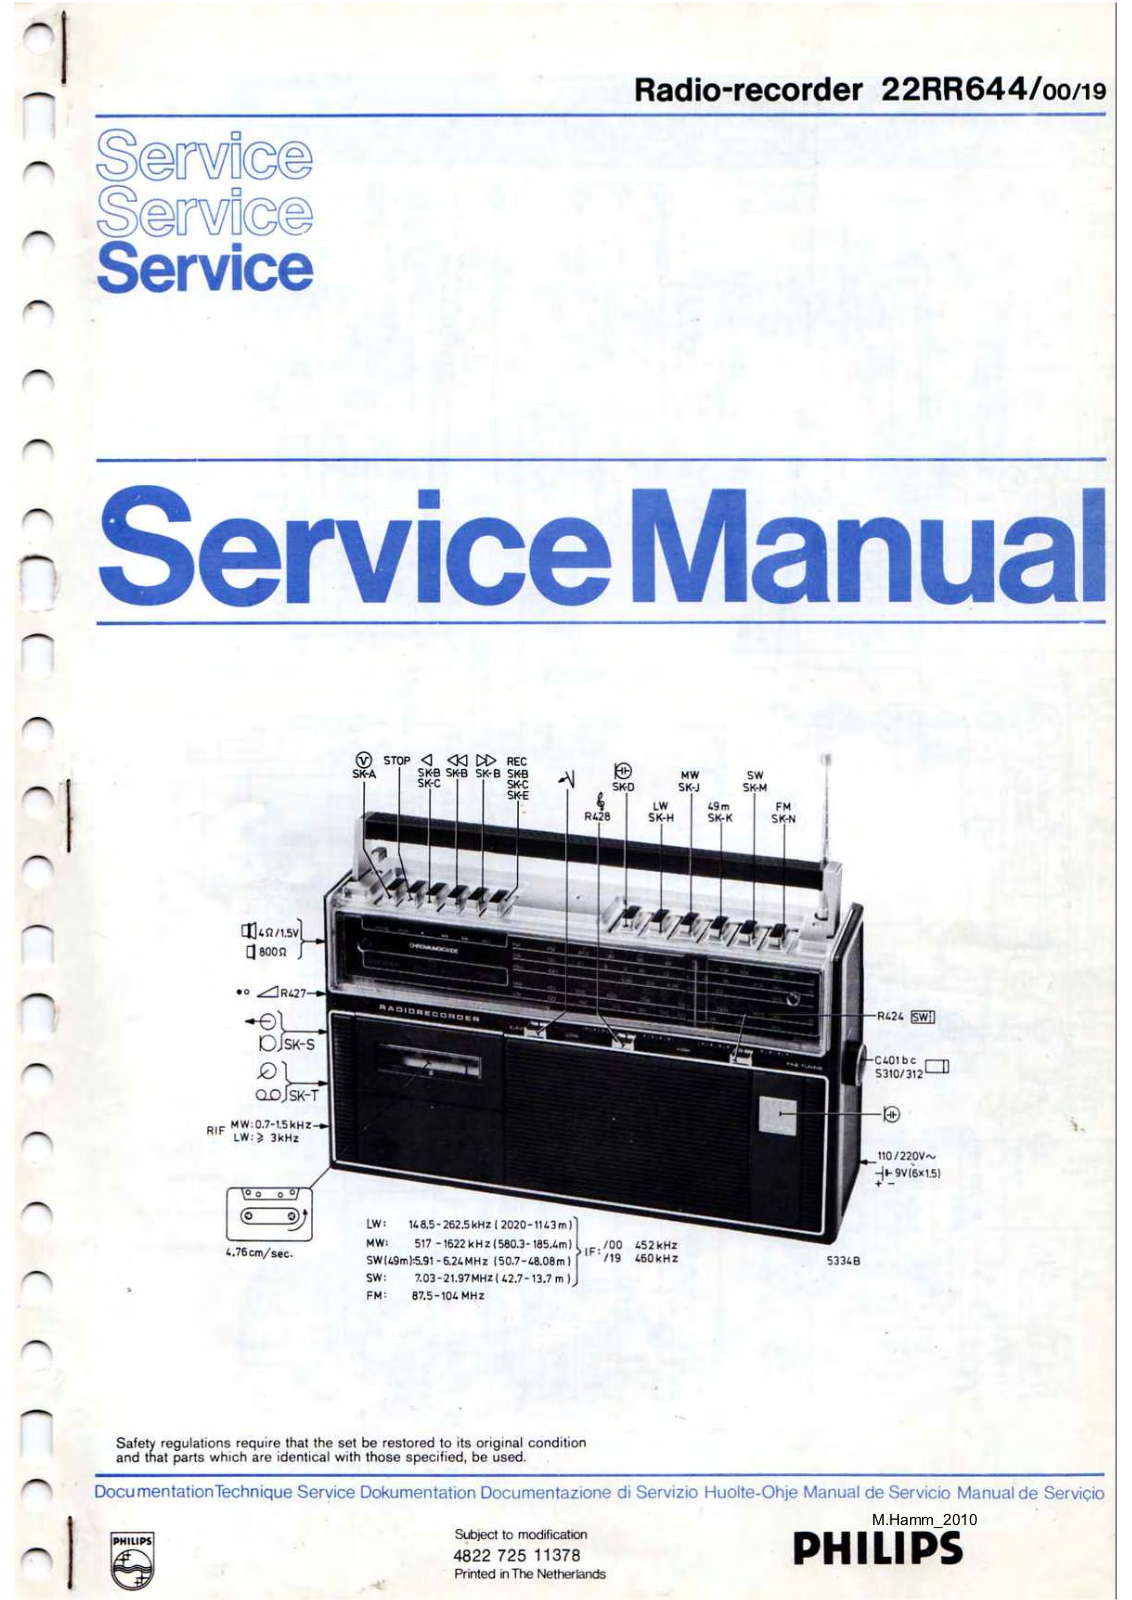 Philips 22-RR-644 Service Manual